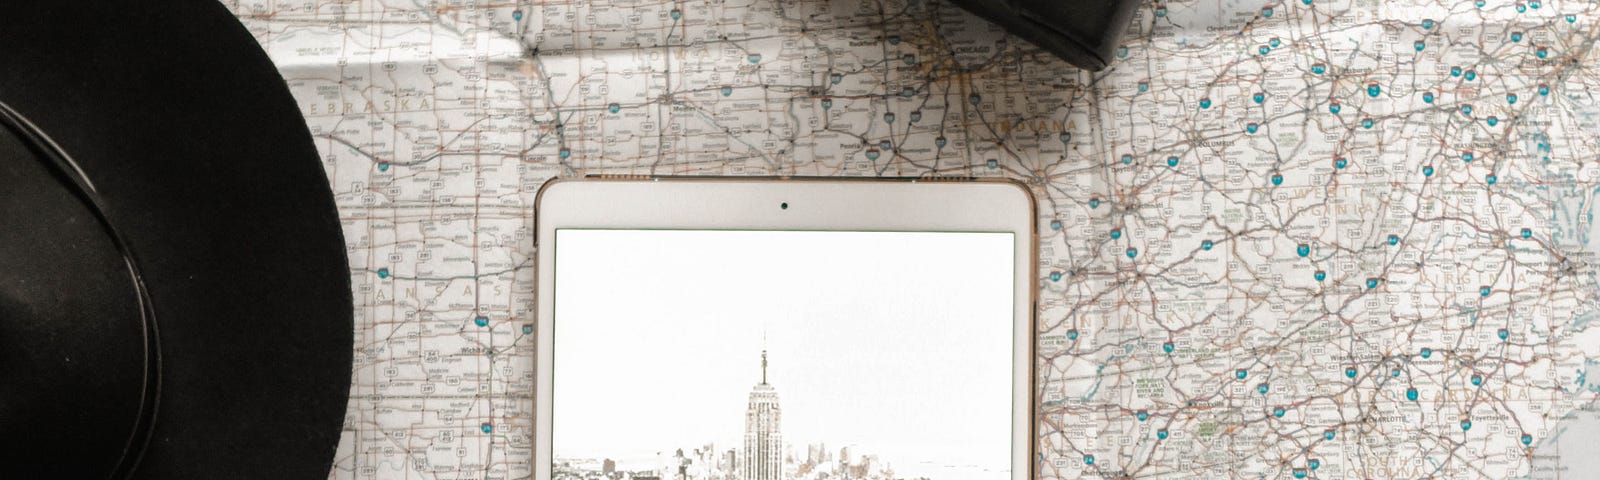 A tablet showing an image of New York, sat on a map. A hat and camera lay on the table too.